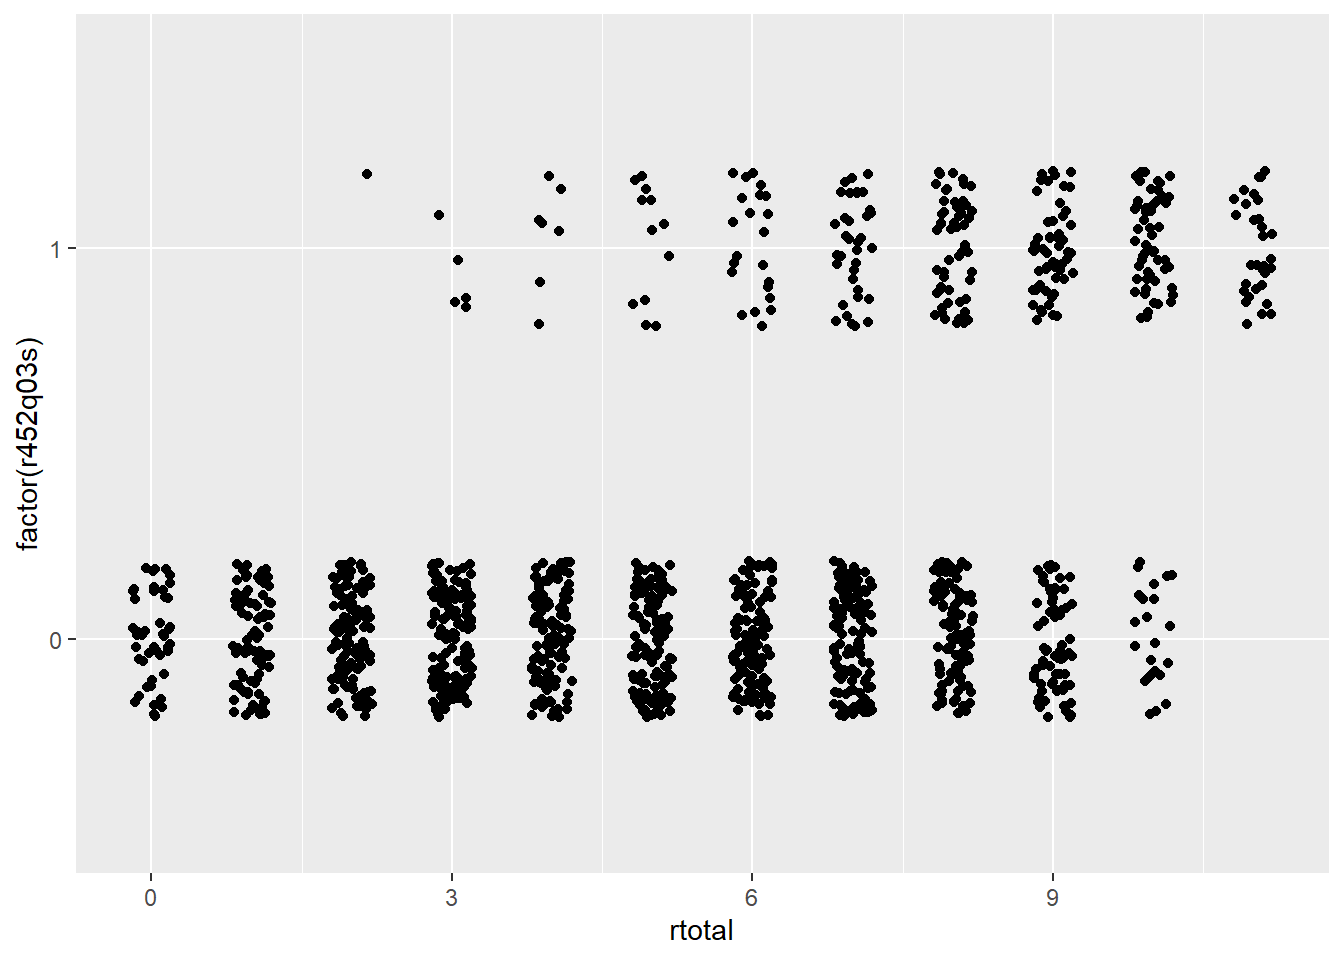 Scatter plots showing the relationship between total scores on the x-axis with dichotomous item response on two PISA items on the y-axis.